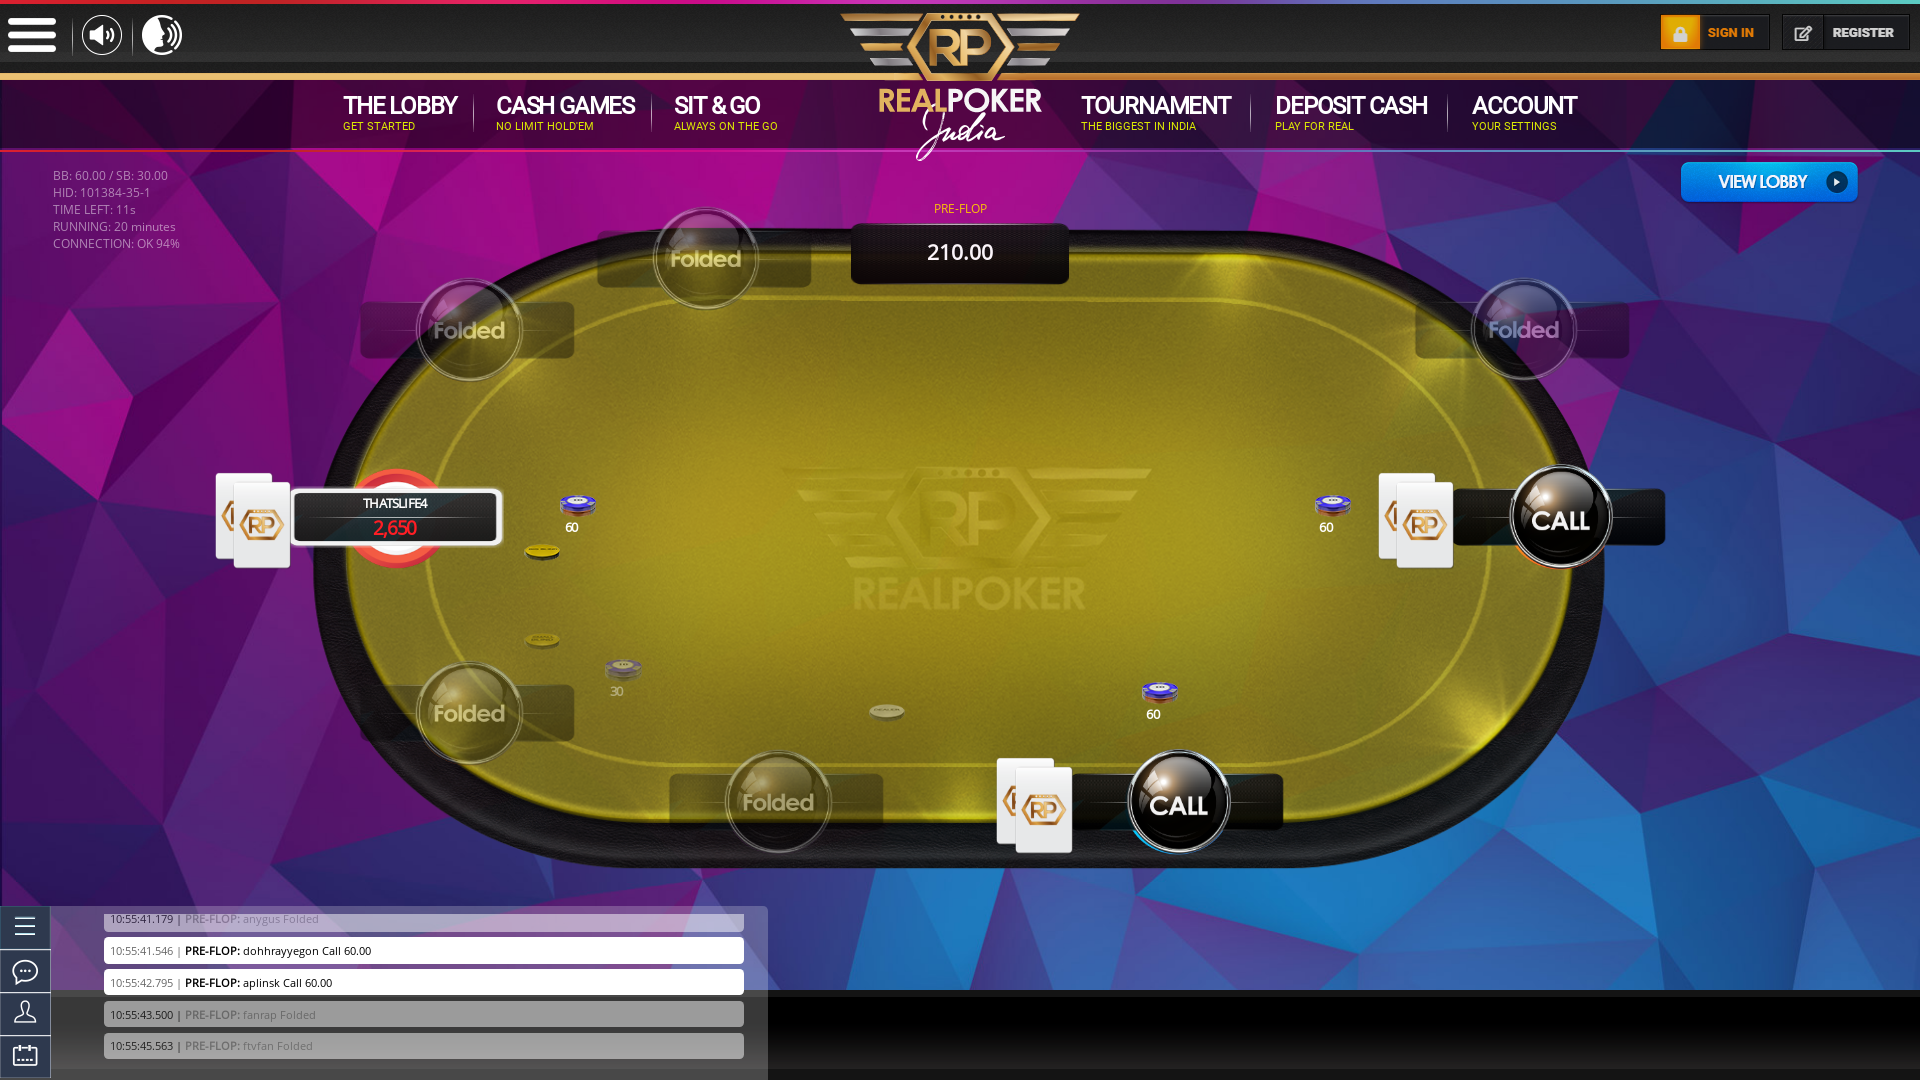 Bhubaneswar poker table on a 10 player table in the 20th minute